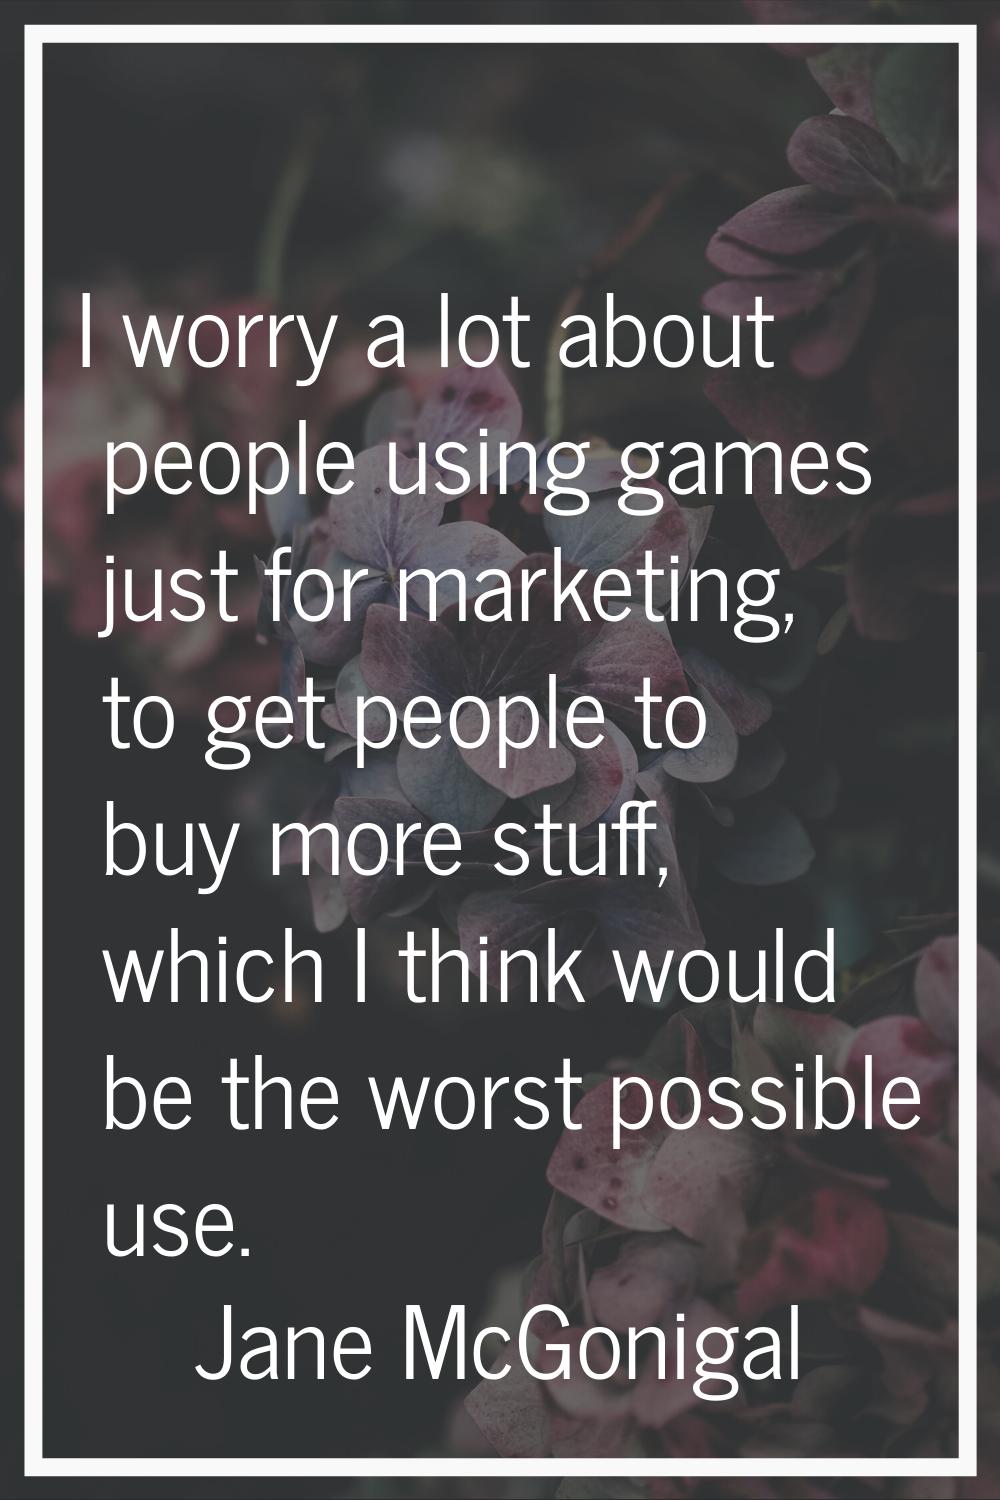 I worry a lot about people using games just for marketing, to get people to buy more stuff, which I